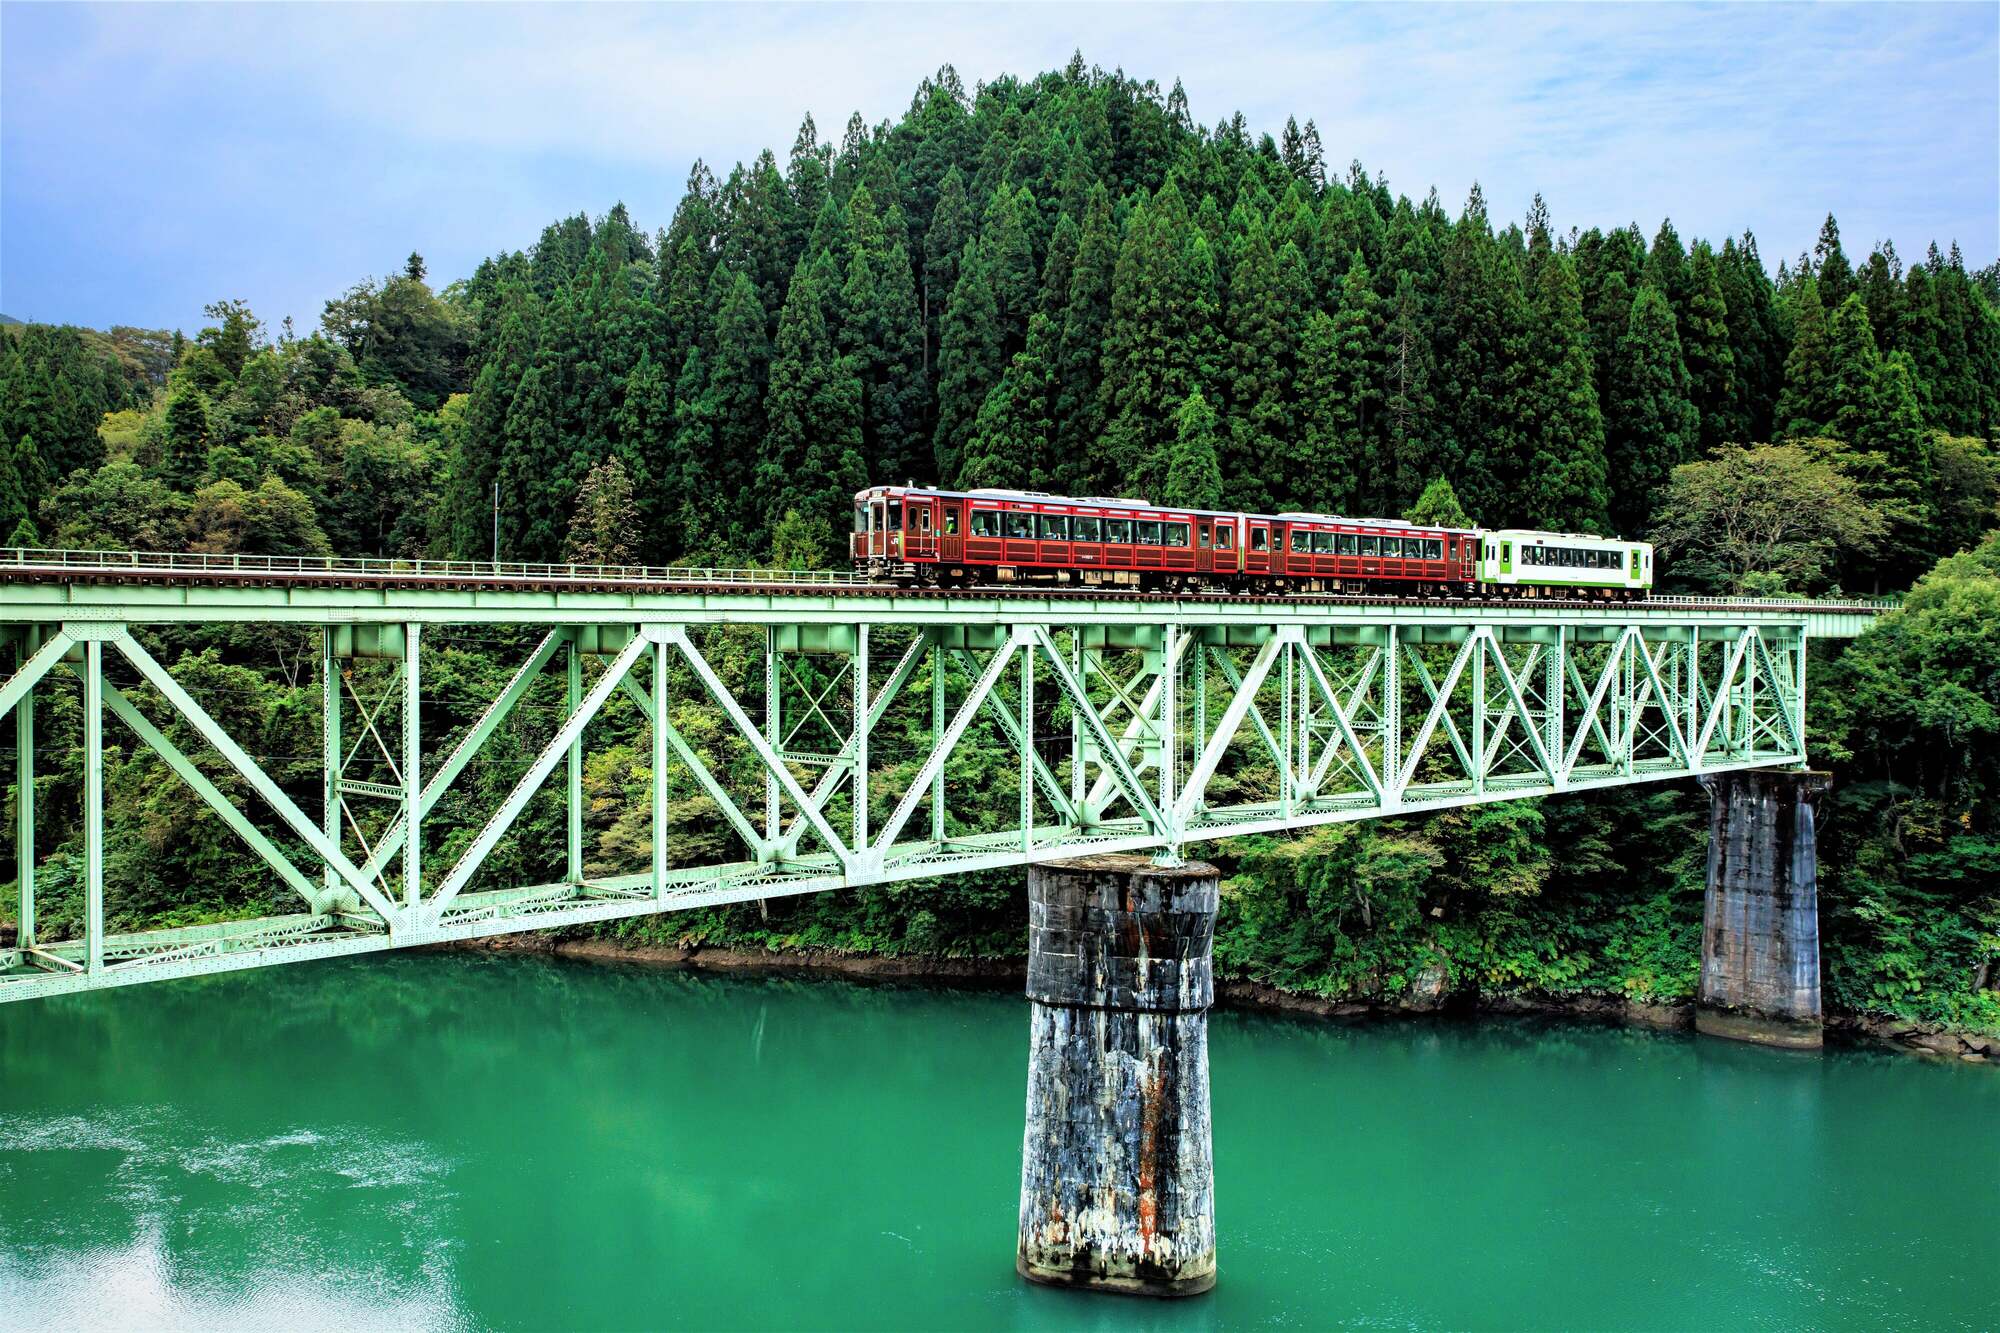 Awe and wonder await on one of Japan’s most romantic train journeys.